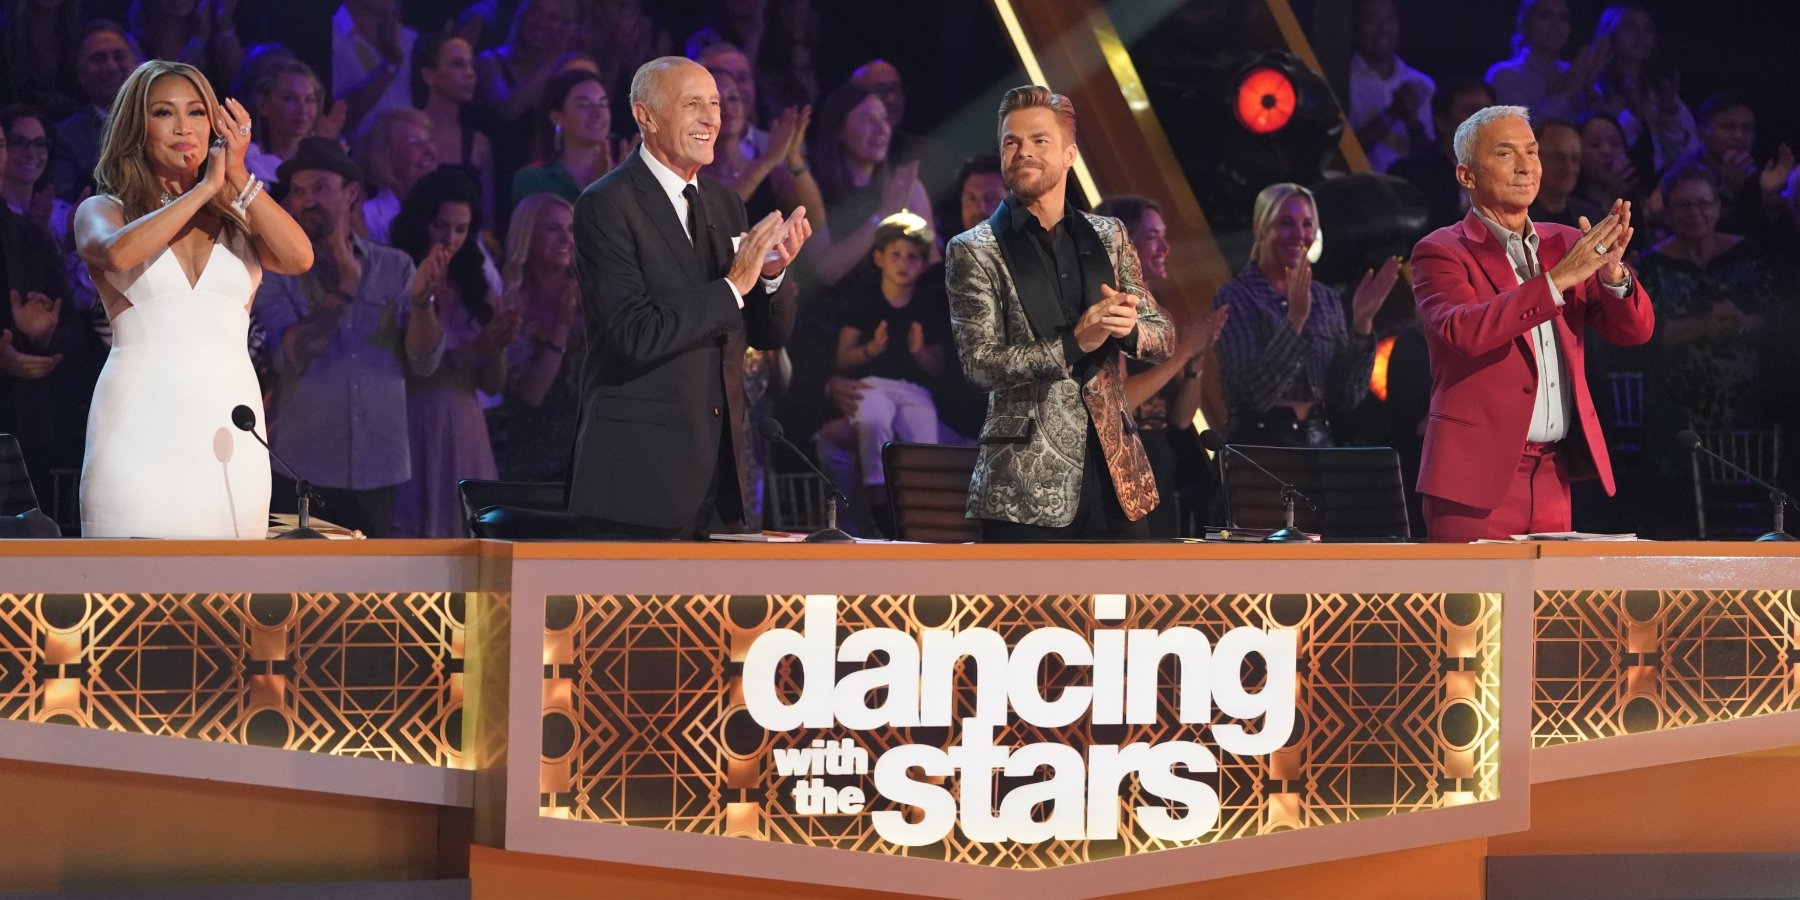 carrie ann inaba, len goodman, derek hough and bruno tonioli judge dancing with the stars.